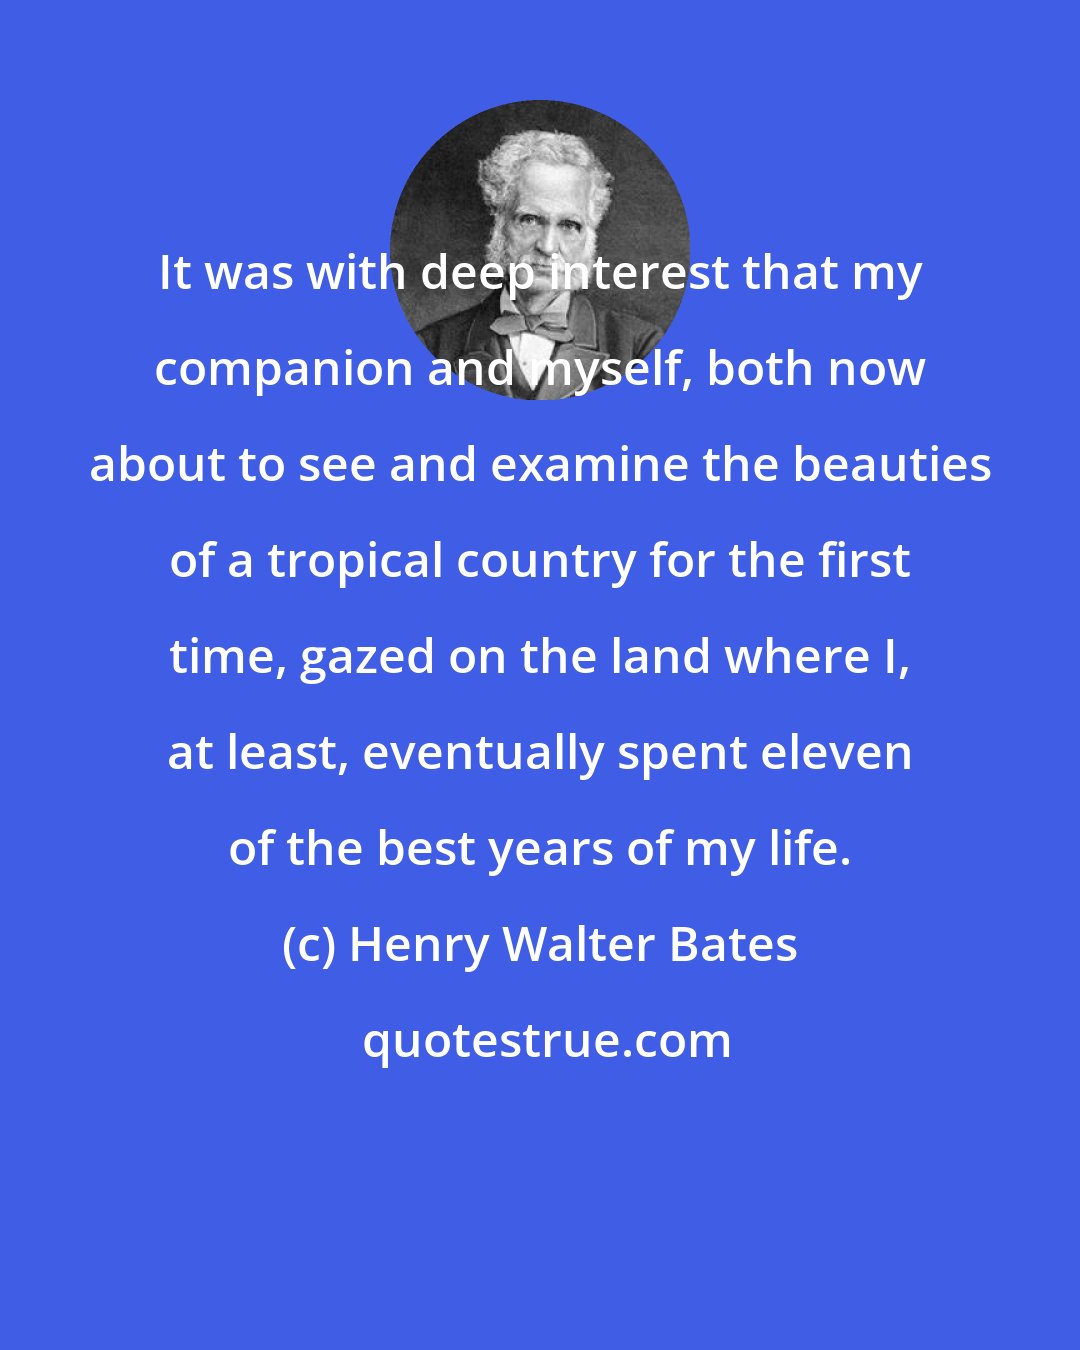 Henry Walter Bates: It was with deep interest that my companion and myself, both now about to see and examine the beauties of a tropical country for the first time, gazed on the land where I, at least, eventually spent eleven of the best years of my life.